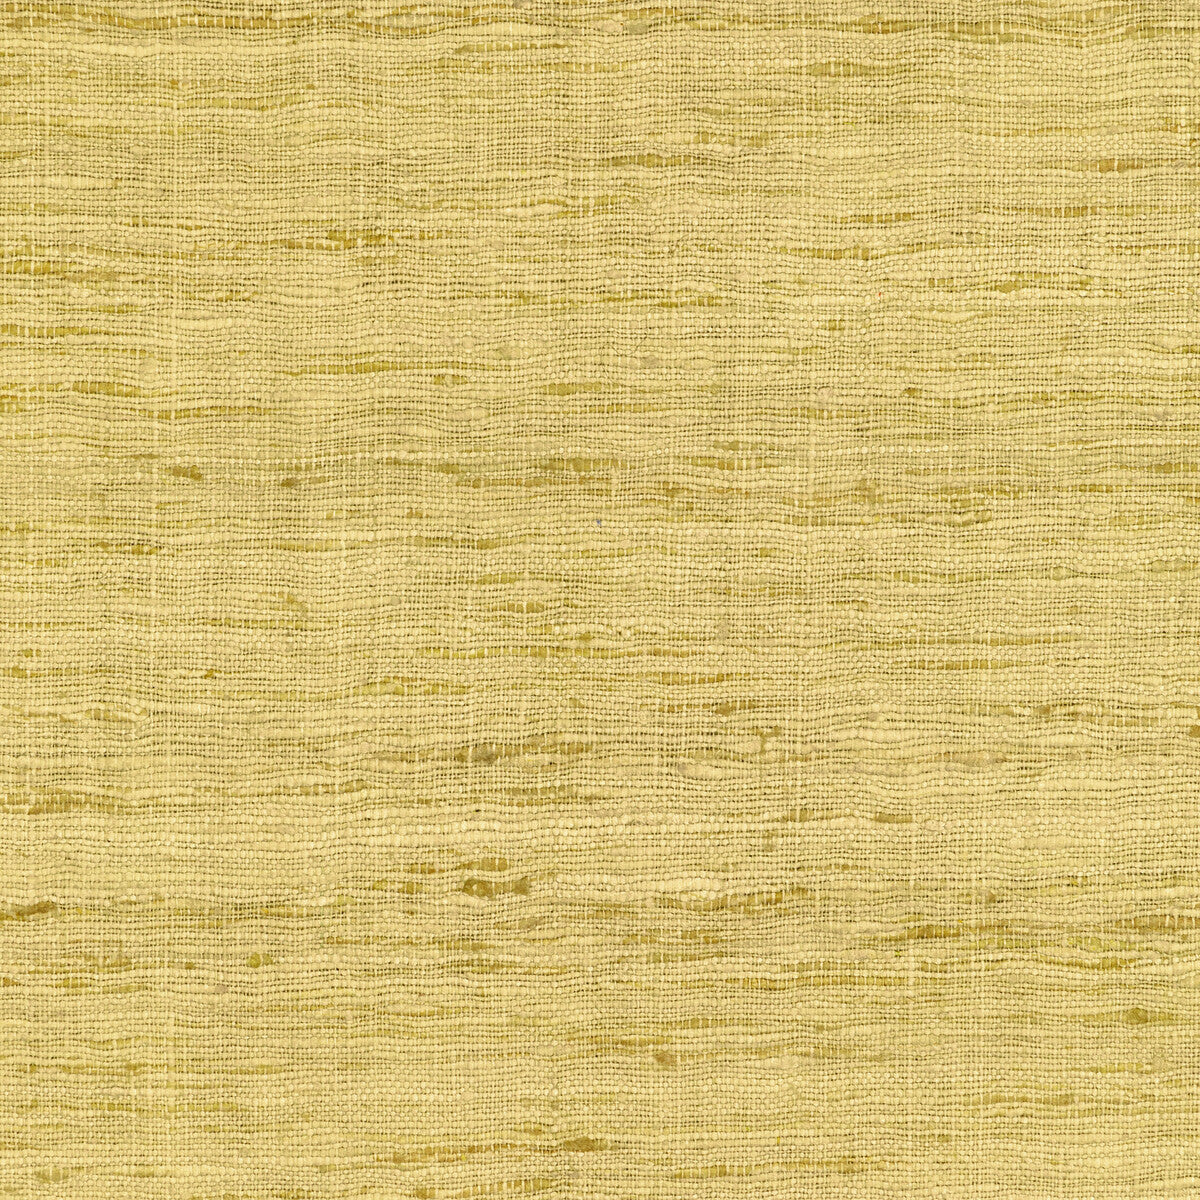 Sonoma fabric in citrona color - pattern GWF-3109.40.0 - by Lee Jofa Modern in the Kelly Wearstler VI collection